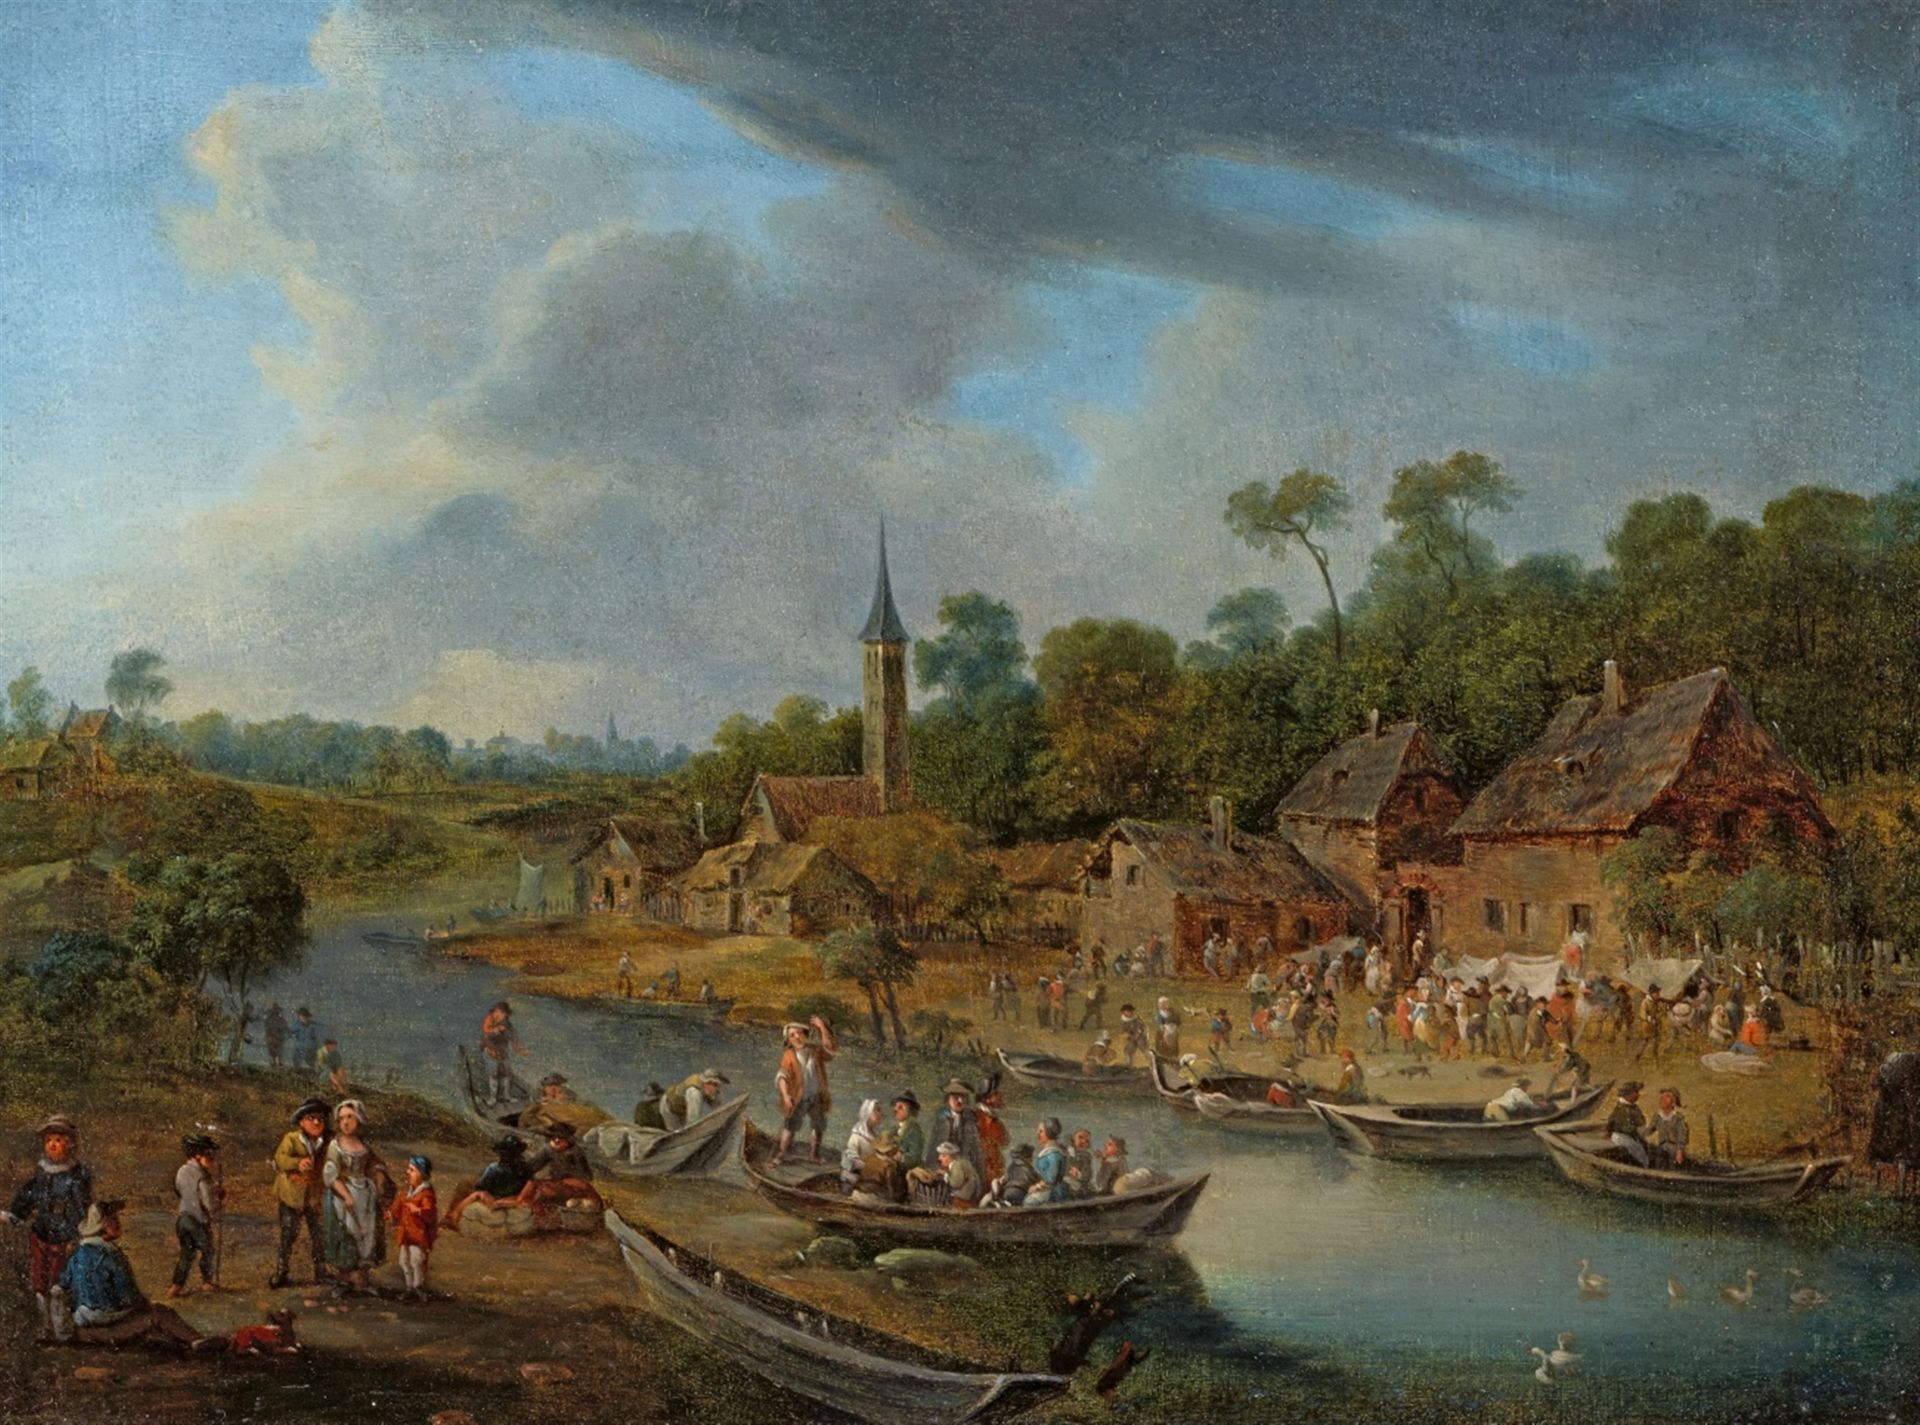 Mathys Schoevaerdts, River Landscape with a Village, Anglers, and Washerwomen